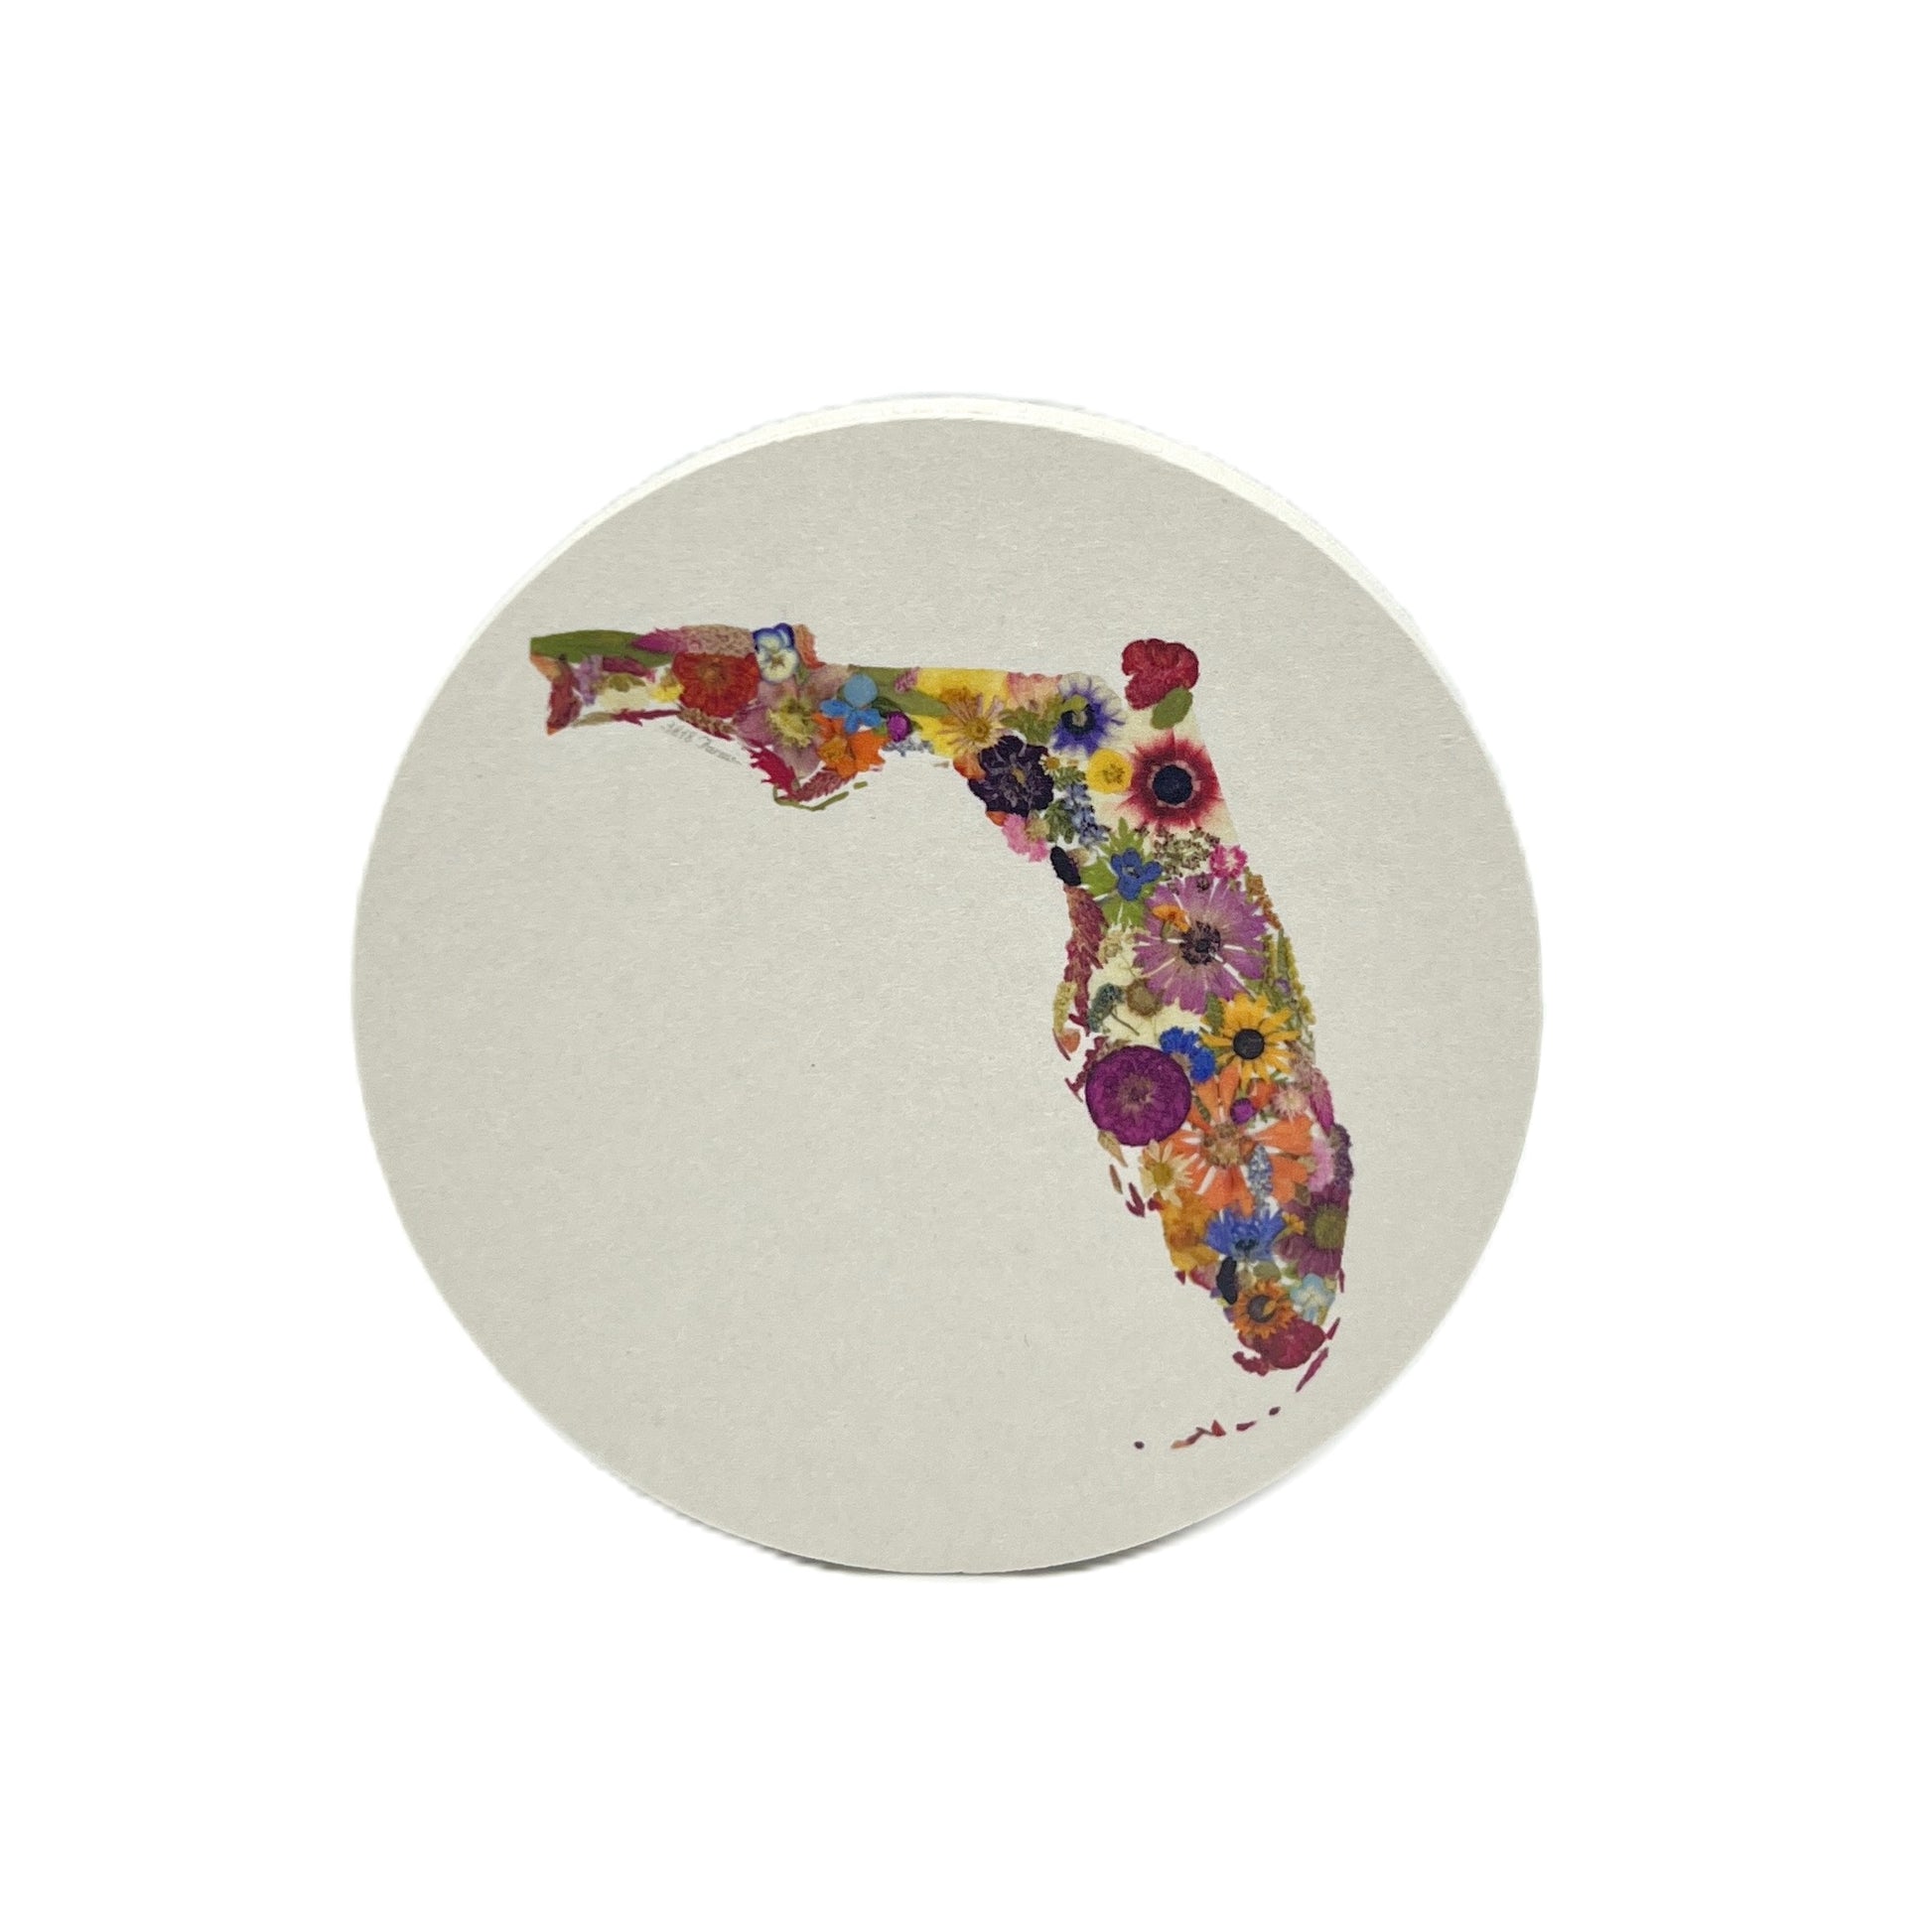 State Themed Drink Coasters (Set of 6)  - "Where I Bloom" Collection Coaster 1818 Farms Florida  